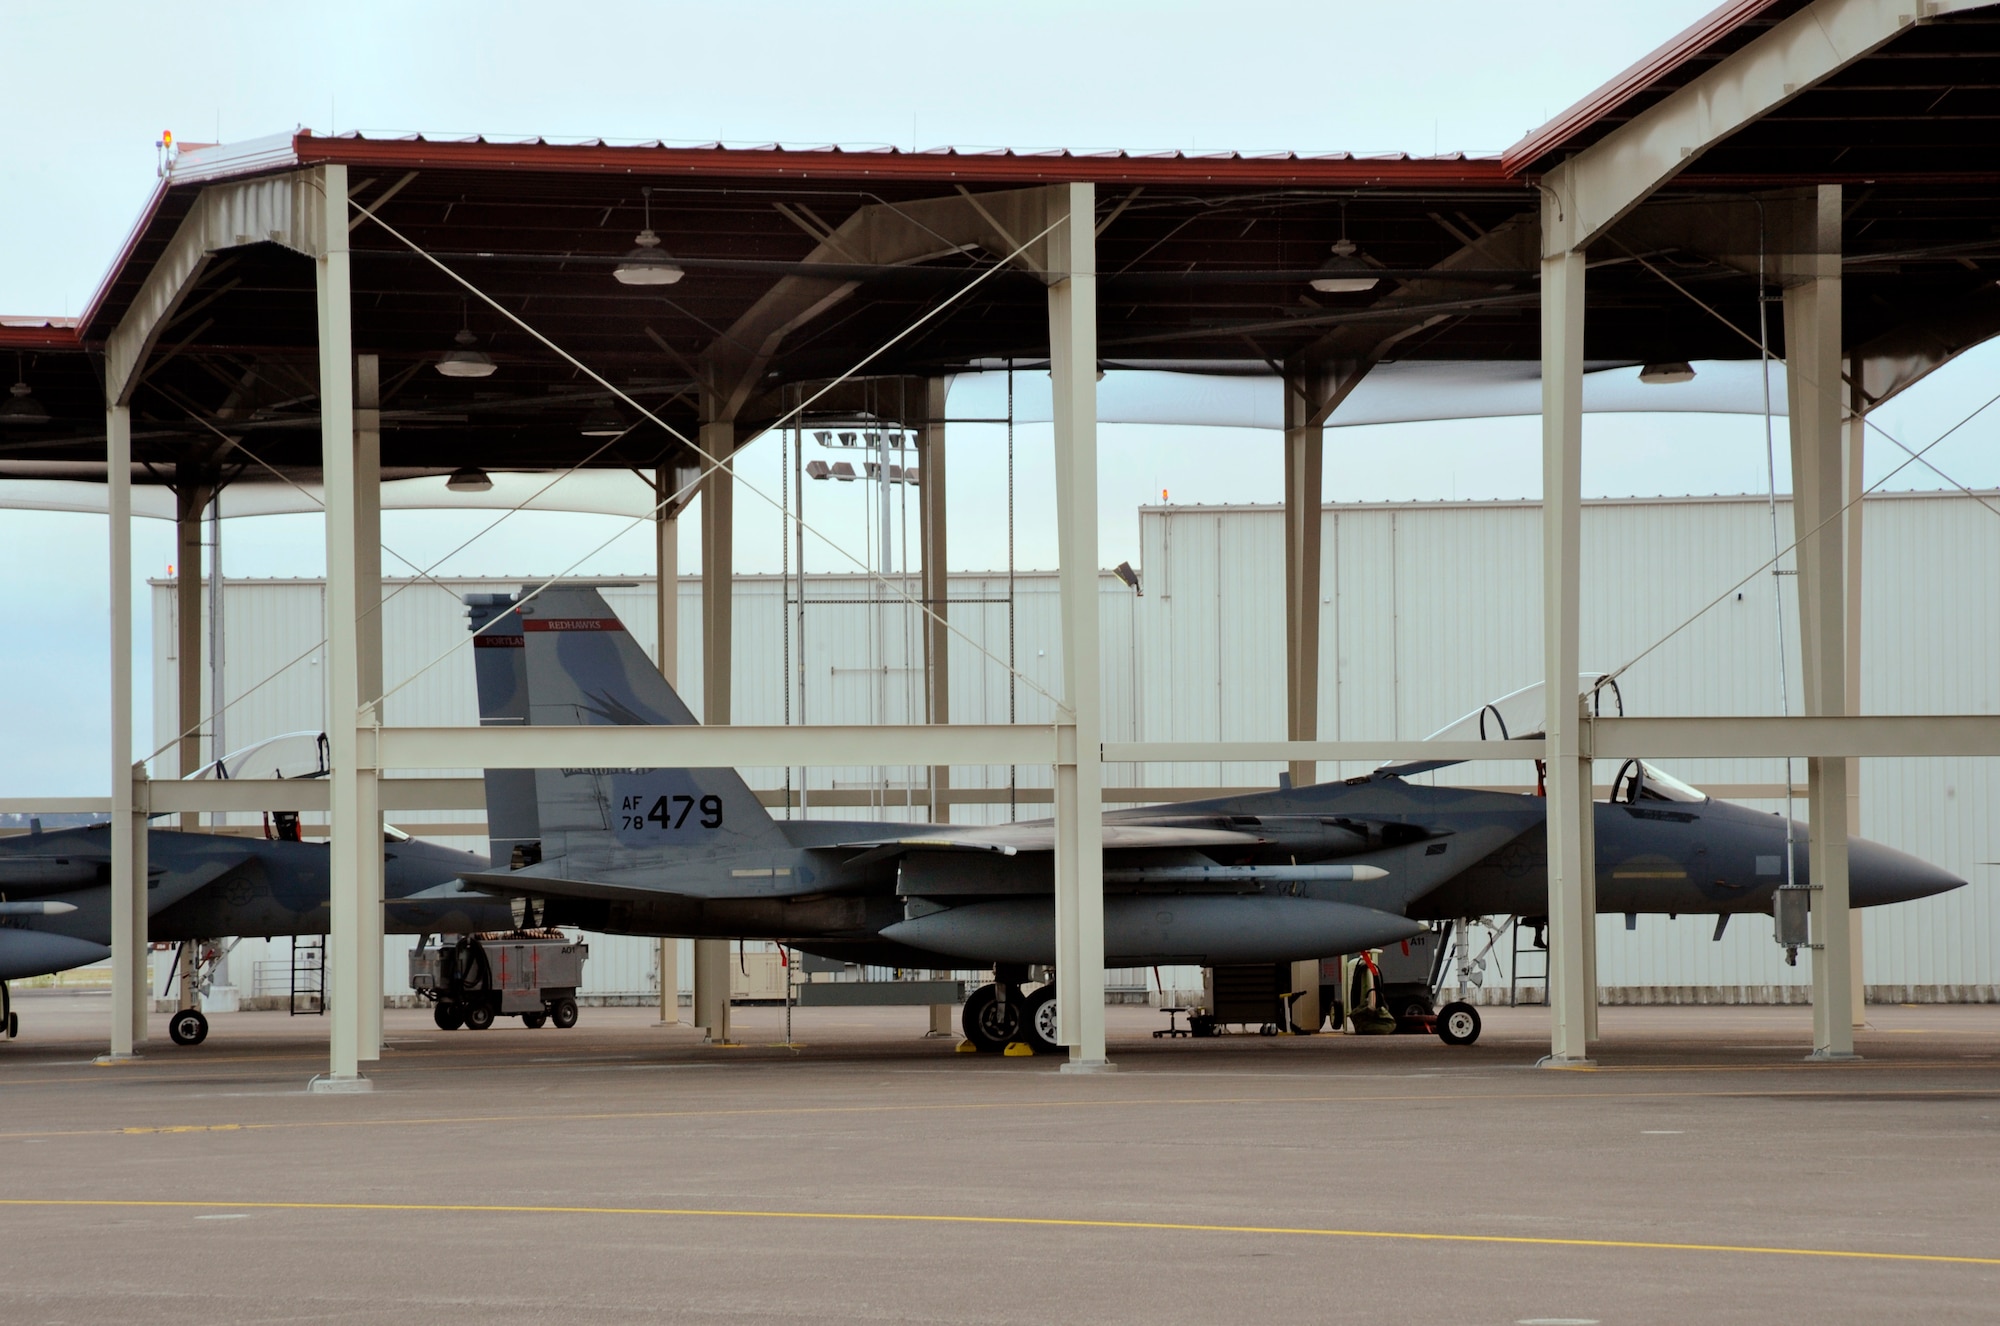 F-15 Eagles from the 142nd Fighter Wing sit ready in nine new aircraft shelters at the Portland Air National Guard Base, Ore., Aug. 28, 2014. (U.S. Air National Guard photo by Tech. Sgt. John Hughel, 142nd Fighter Wing Public Affairs/Released)